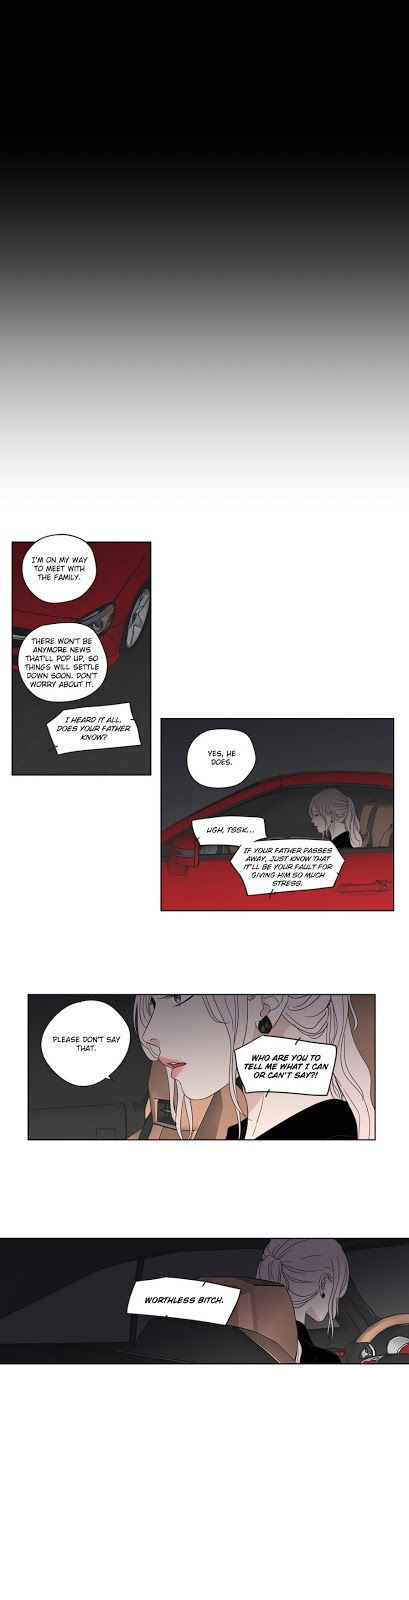 What Does The Fox Say? Chapter 049 page 5